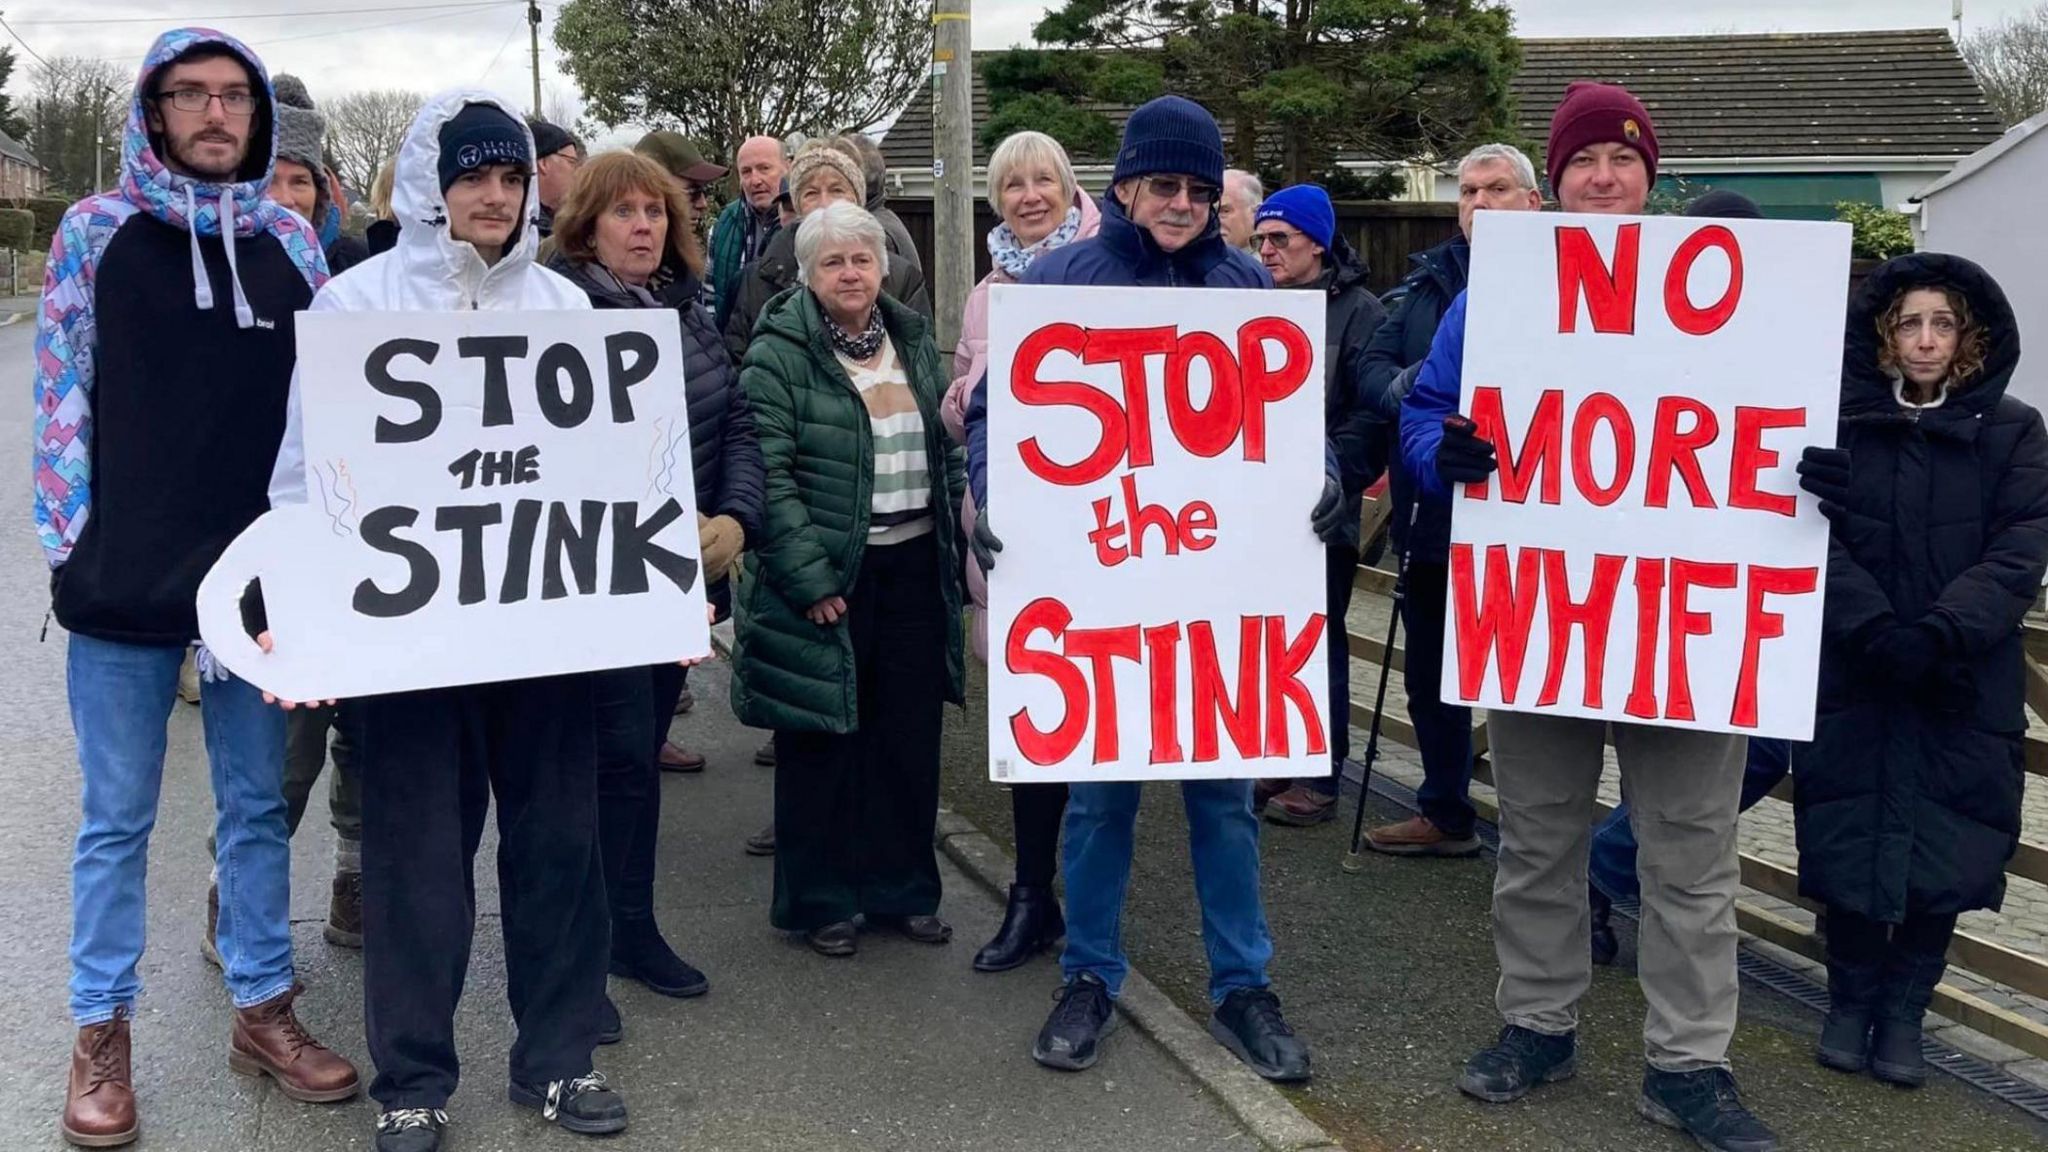 Protestors stood on the road with signs saying 'stop the stink'